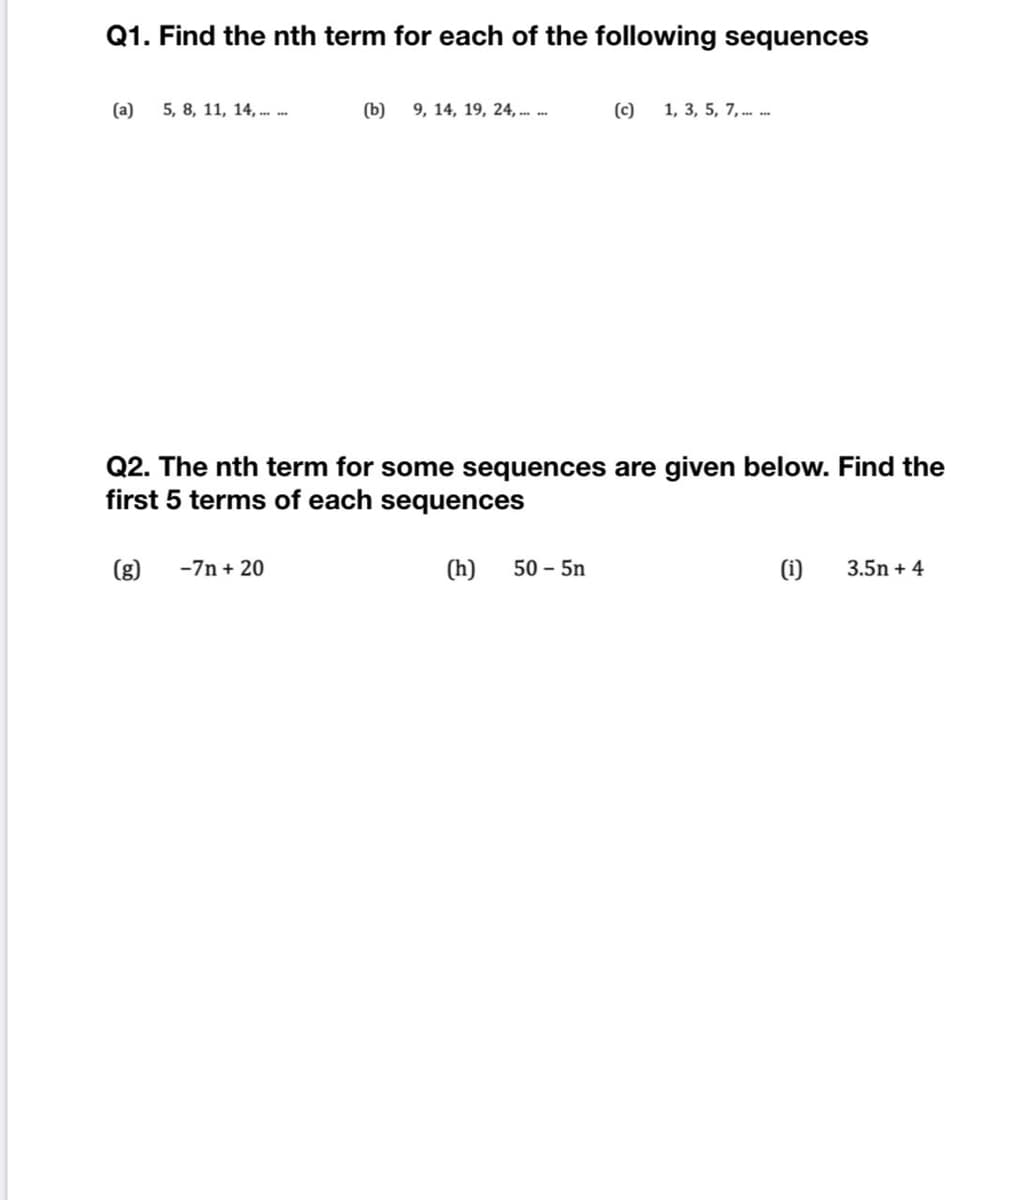 Q1. Find the nth term for each of the following sequences
(a)
5, 8, 11, 14, . .
(b)
9, 14, 19, 24, . .
(c)
1, 3, 5, 7, . .
Q2. The nth term for some sequences are given below. Find the
first 5 terms of each sequences
(g)
-7n + 20
(h)
50 - 5n
(1i)
3.5n + 4
